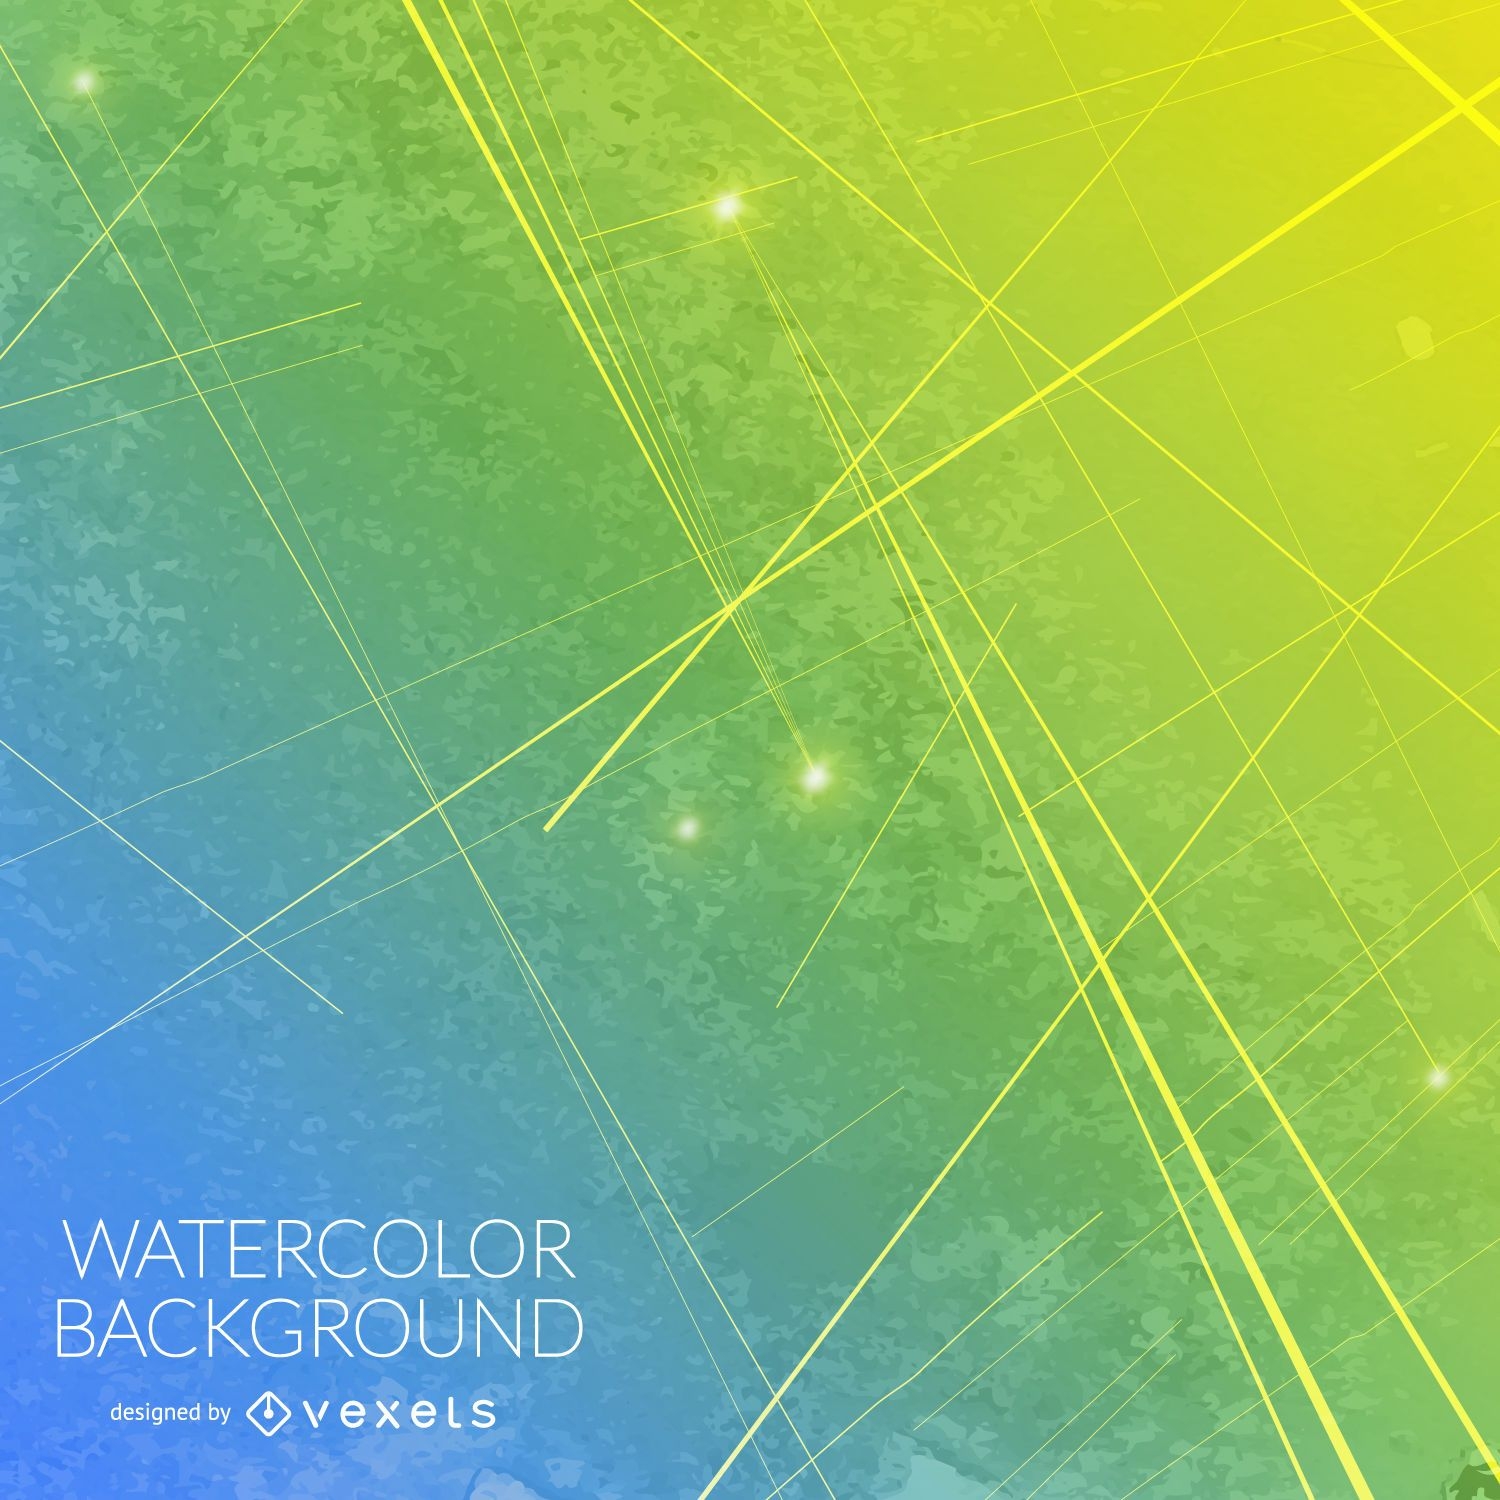 Gradient blue yellow watercolor background